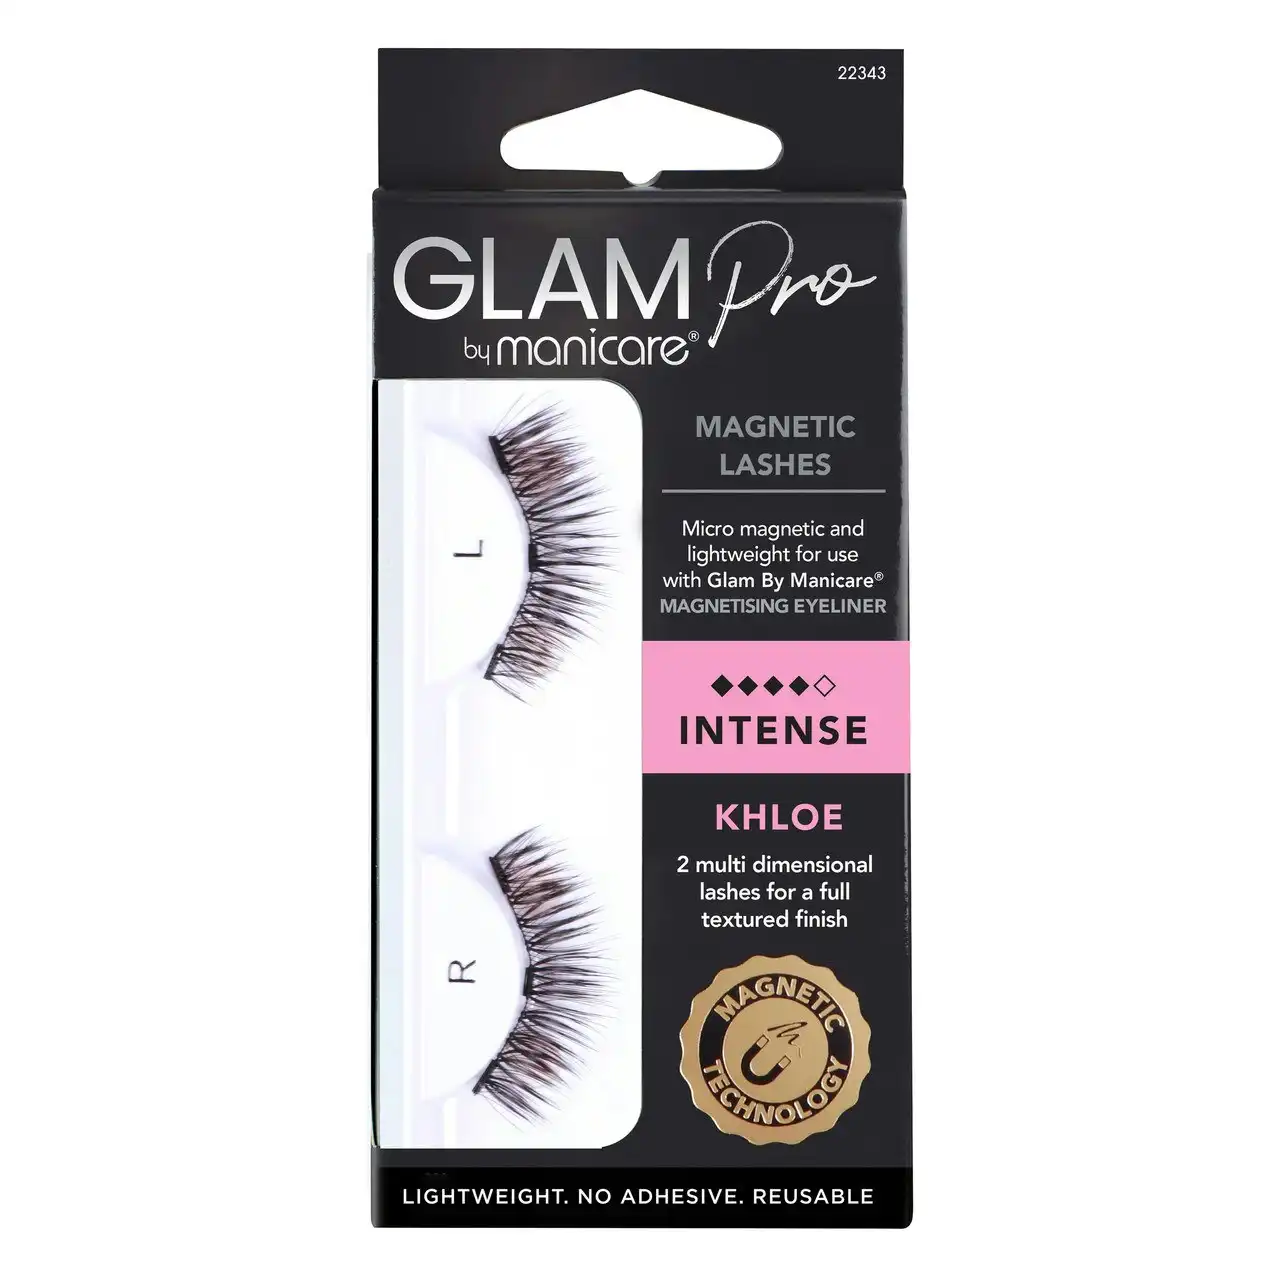 Glam by Manicare Pro Khloe Magnetic Lashes